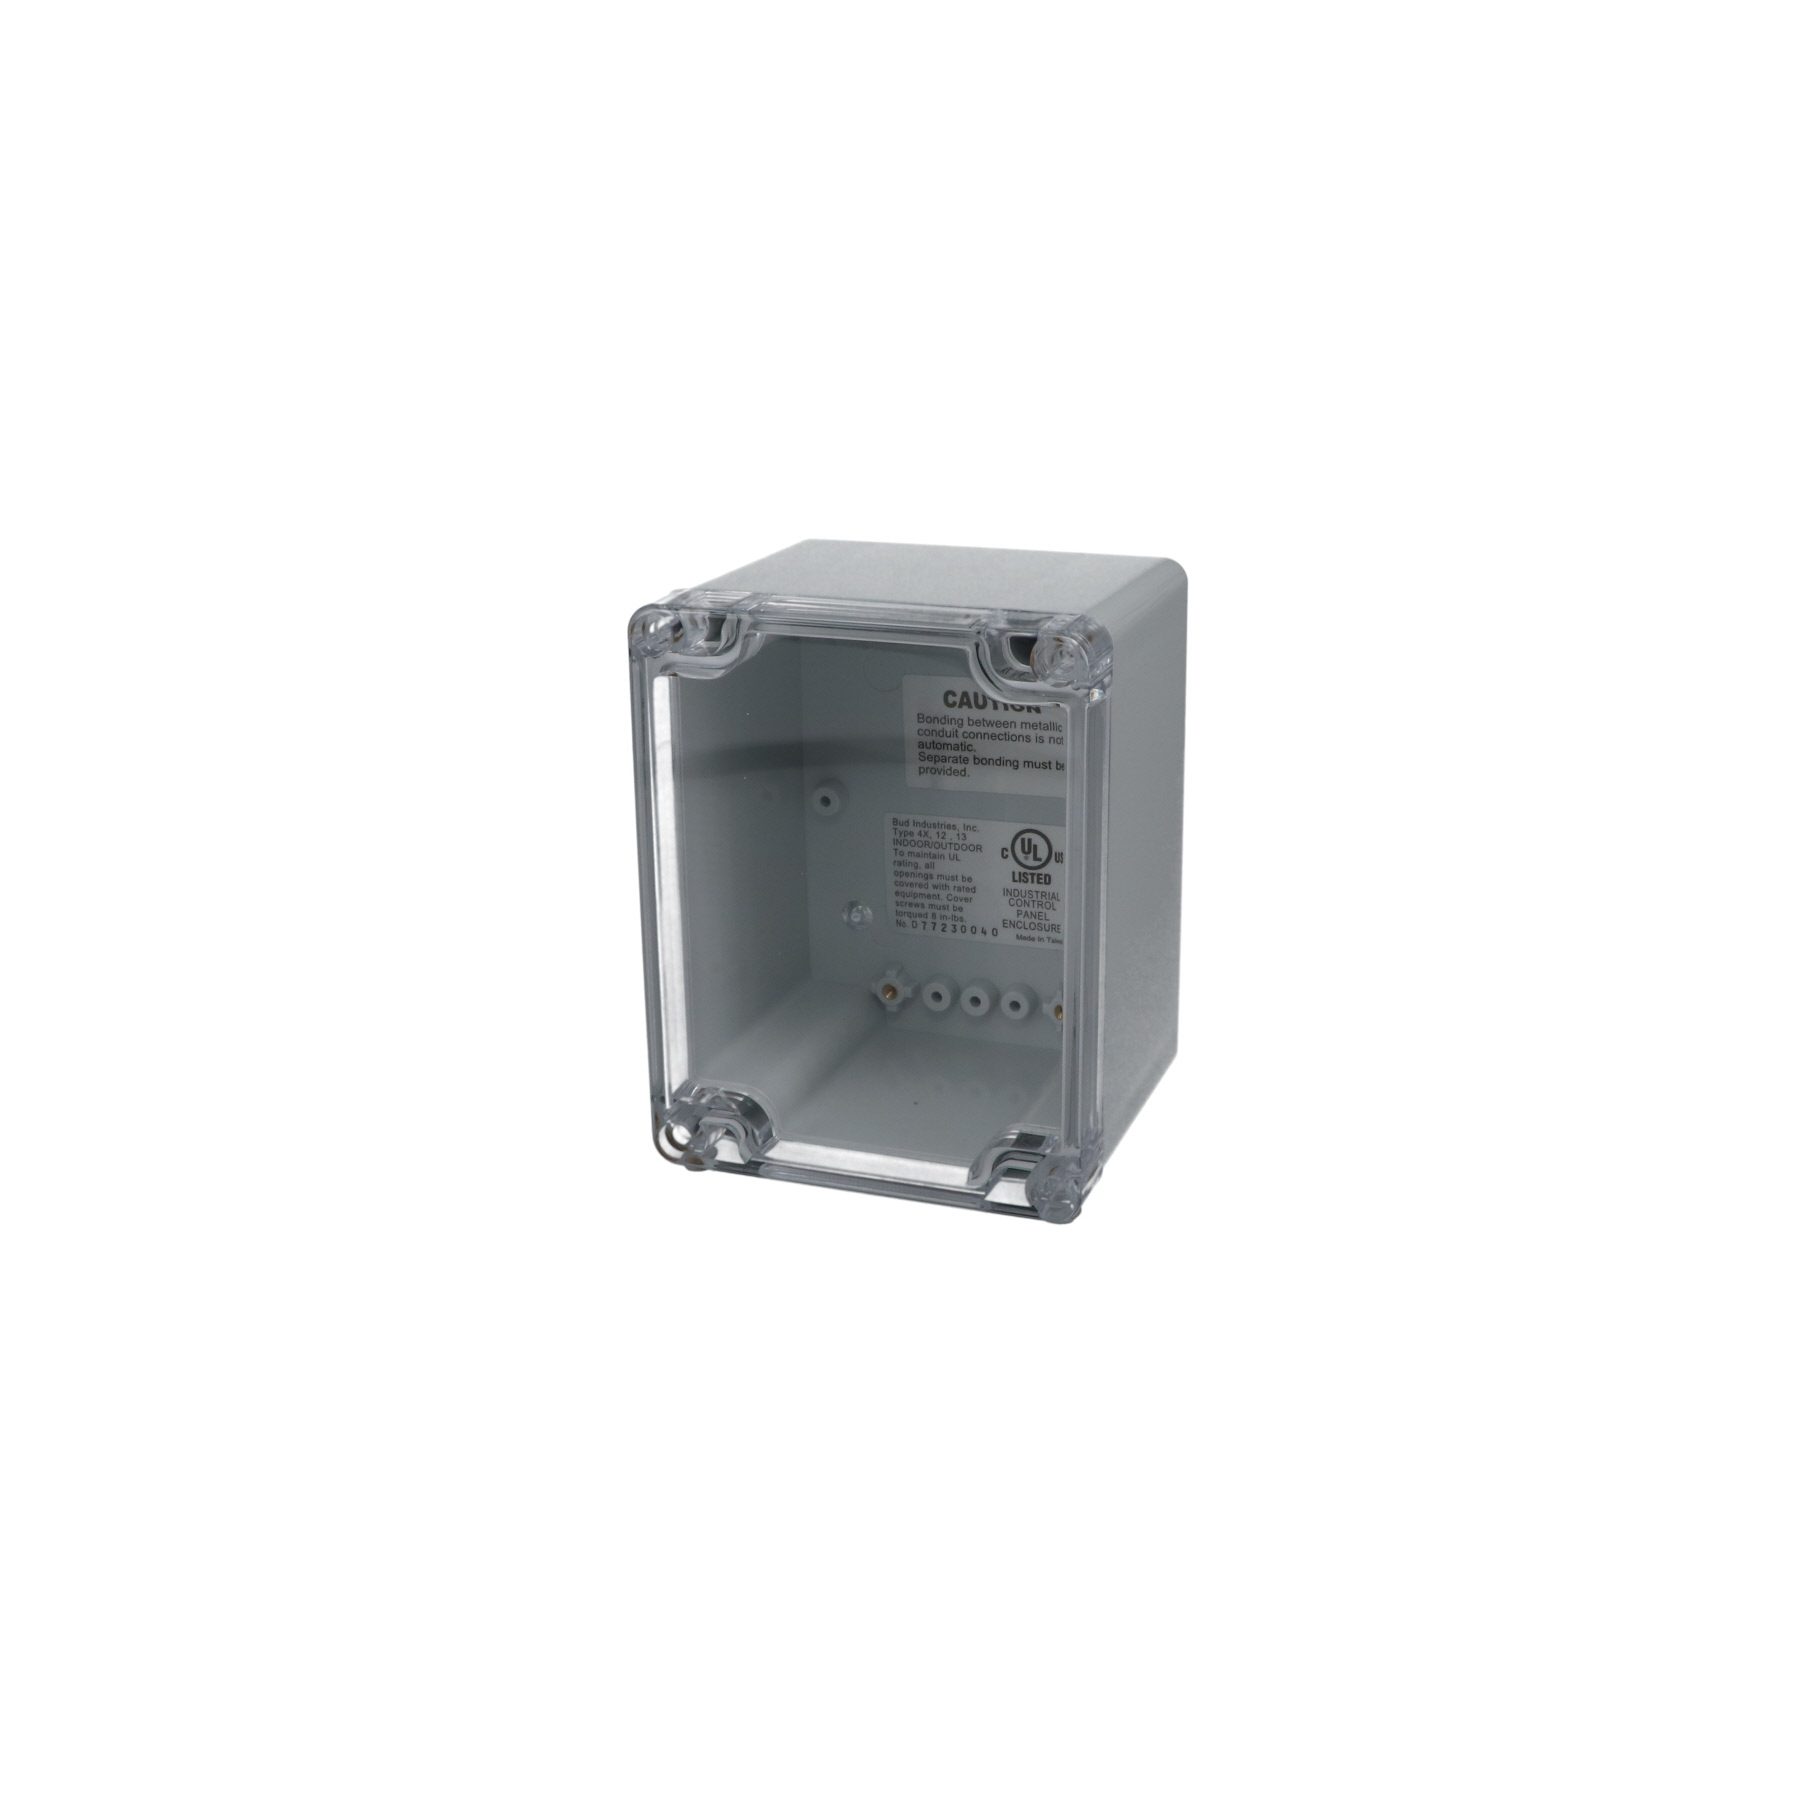 IP65 NEMA 4X Box with Clear Cover PN-1328-C